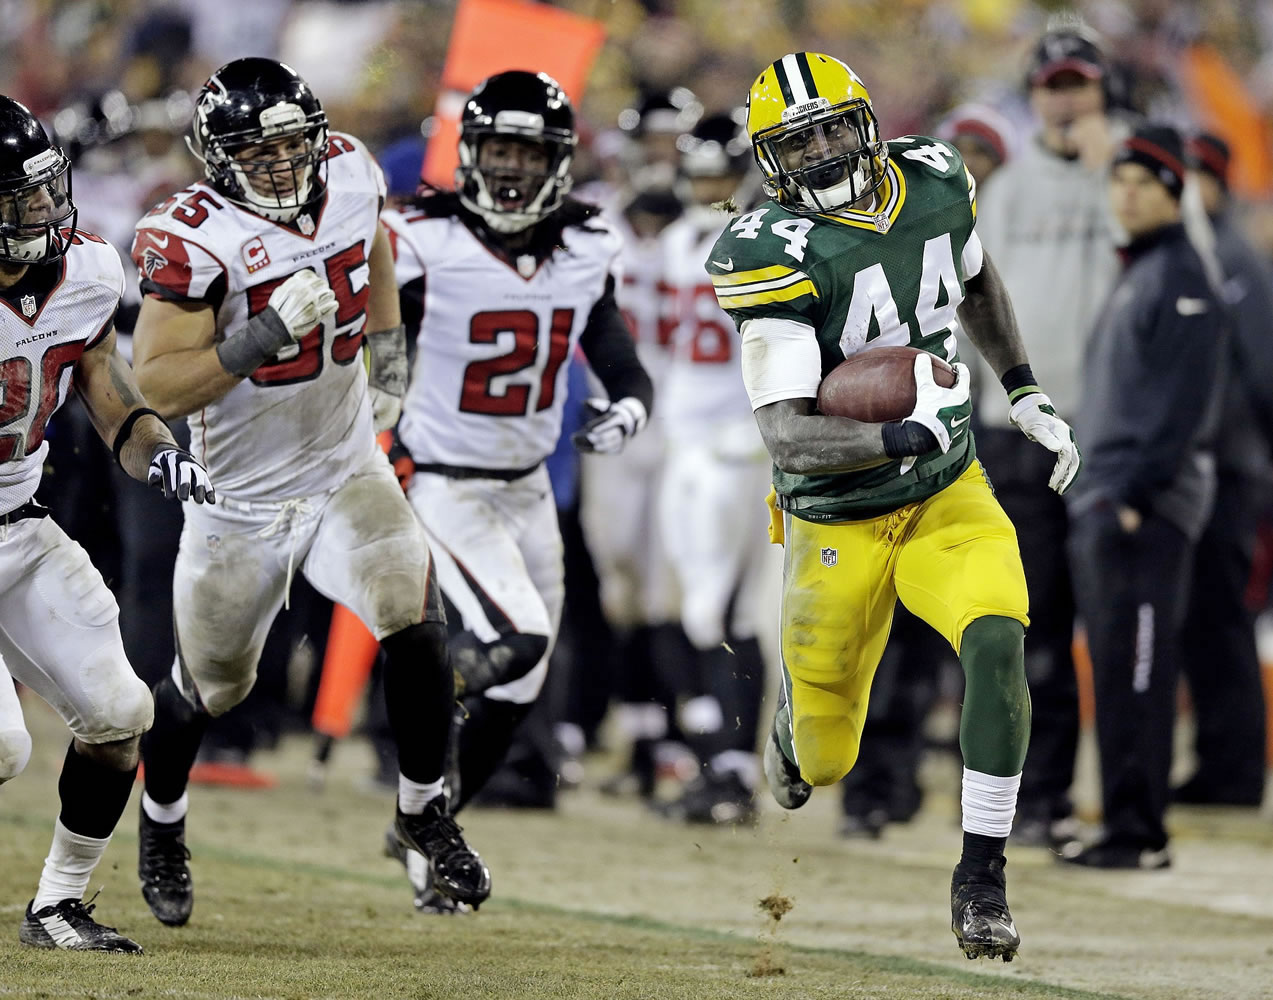 Green Bay Packers' James Starks (44) breaks away for a 41-yard run during the second half against the Atlanta Falcons on Monday, Dec. 8, 2014, in Green Bay, Wis. The Packers won 43-37.